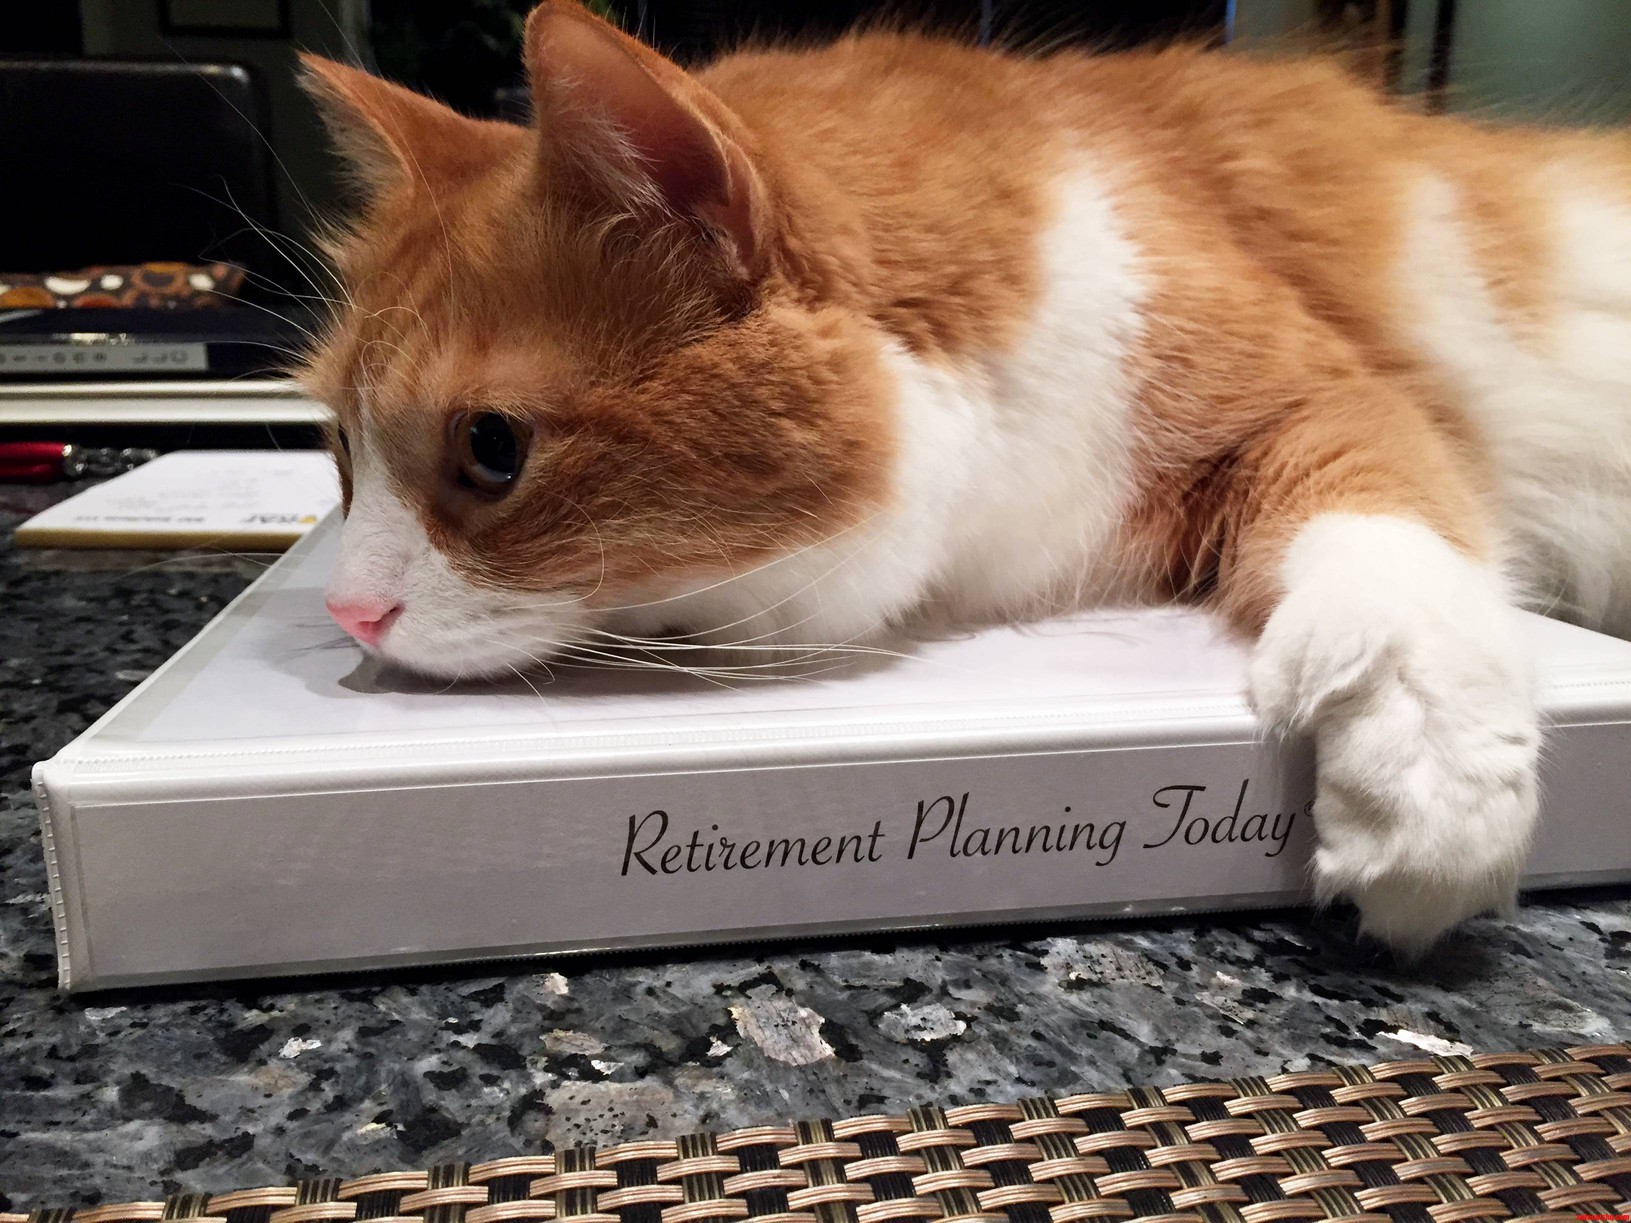 Its never too early to start planning for retirement…especially in cat years